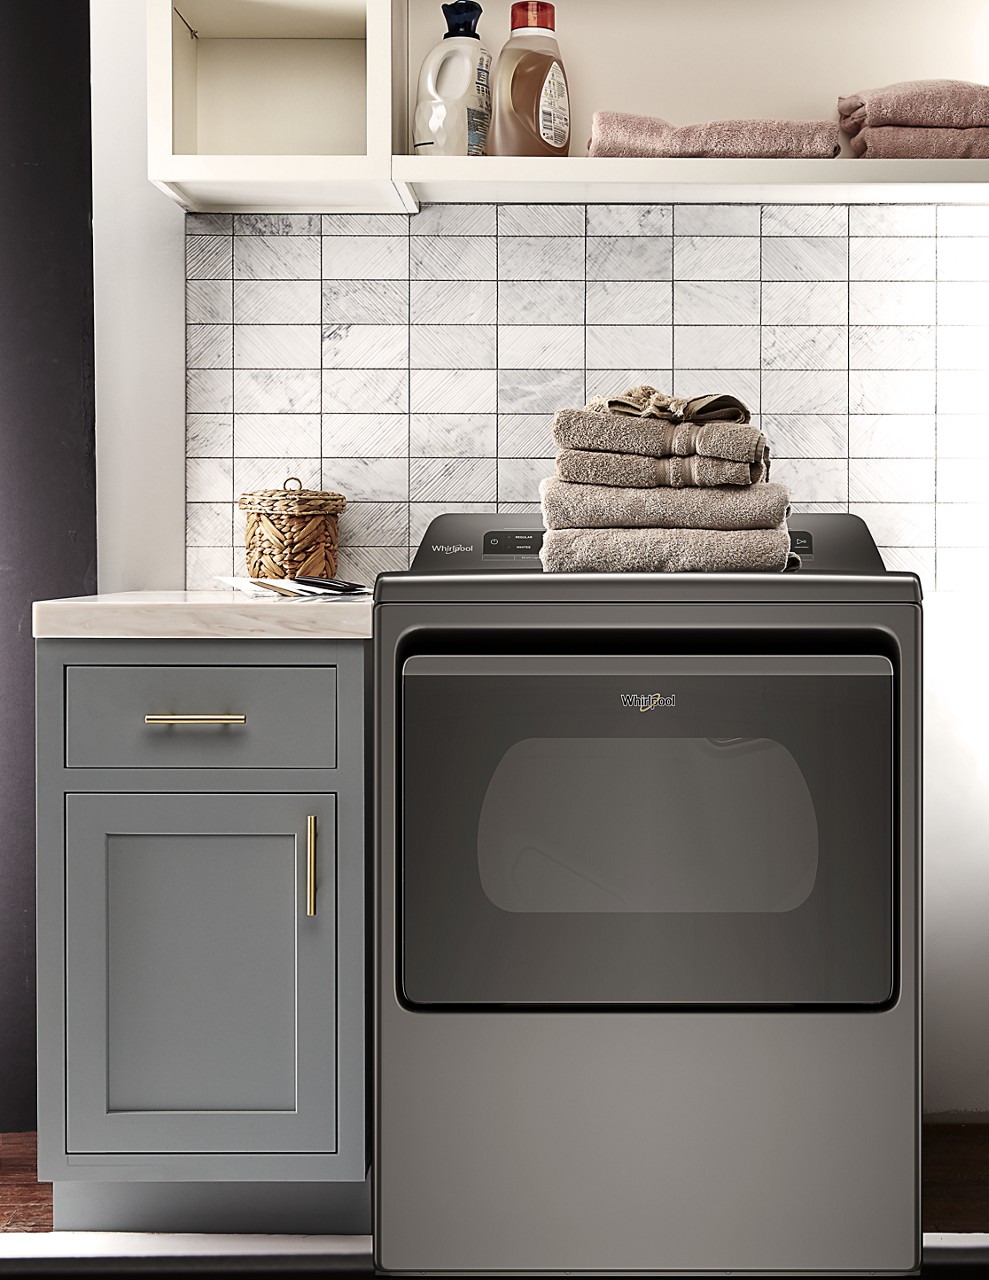 Whirlpool dryer with stack of folded towels on top